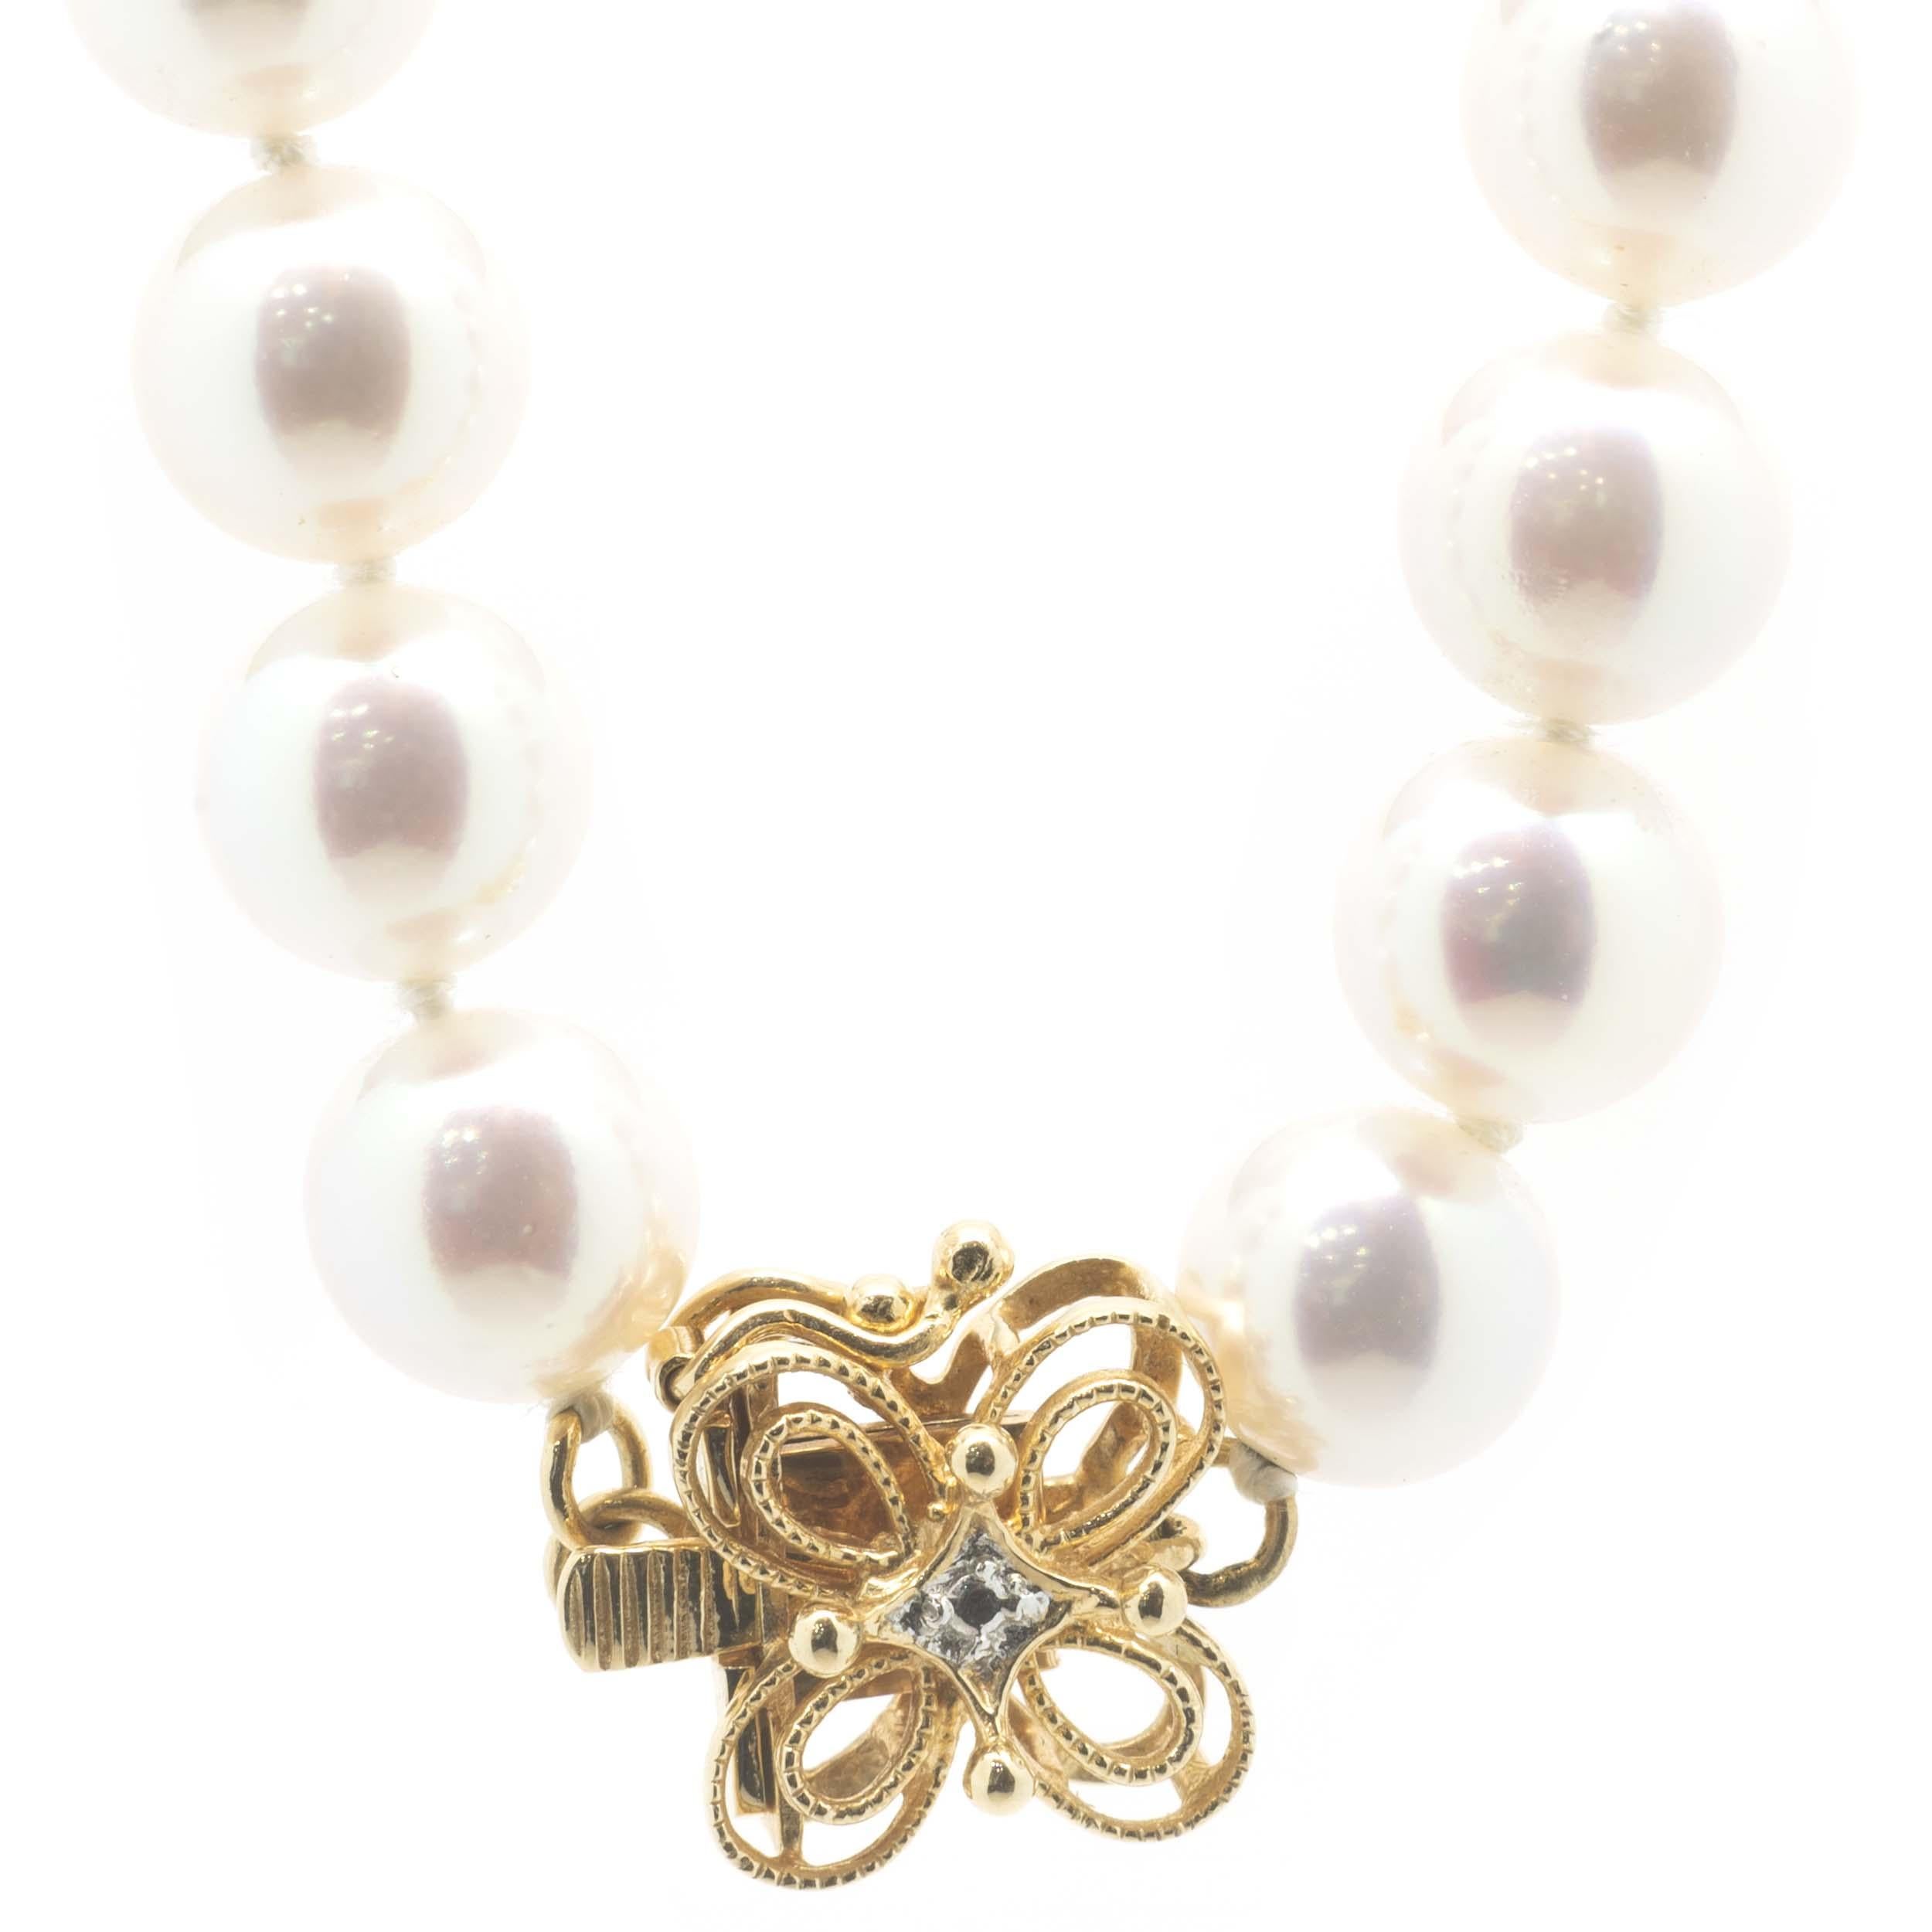 Designer: Custom
Material: 14K yellow gold
Pearl: freshwater cultured = 7.30mm
Dimensions: necklace measures 16-inches in length
Weight: 29.25 grams
